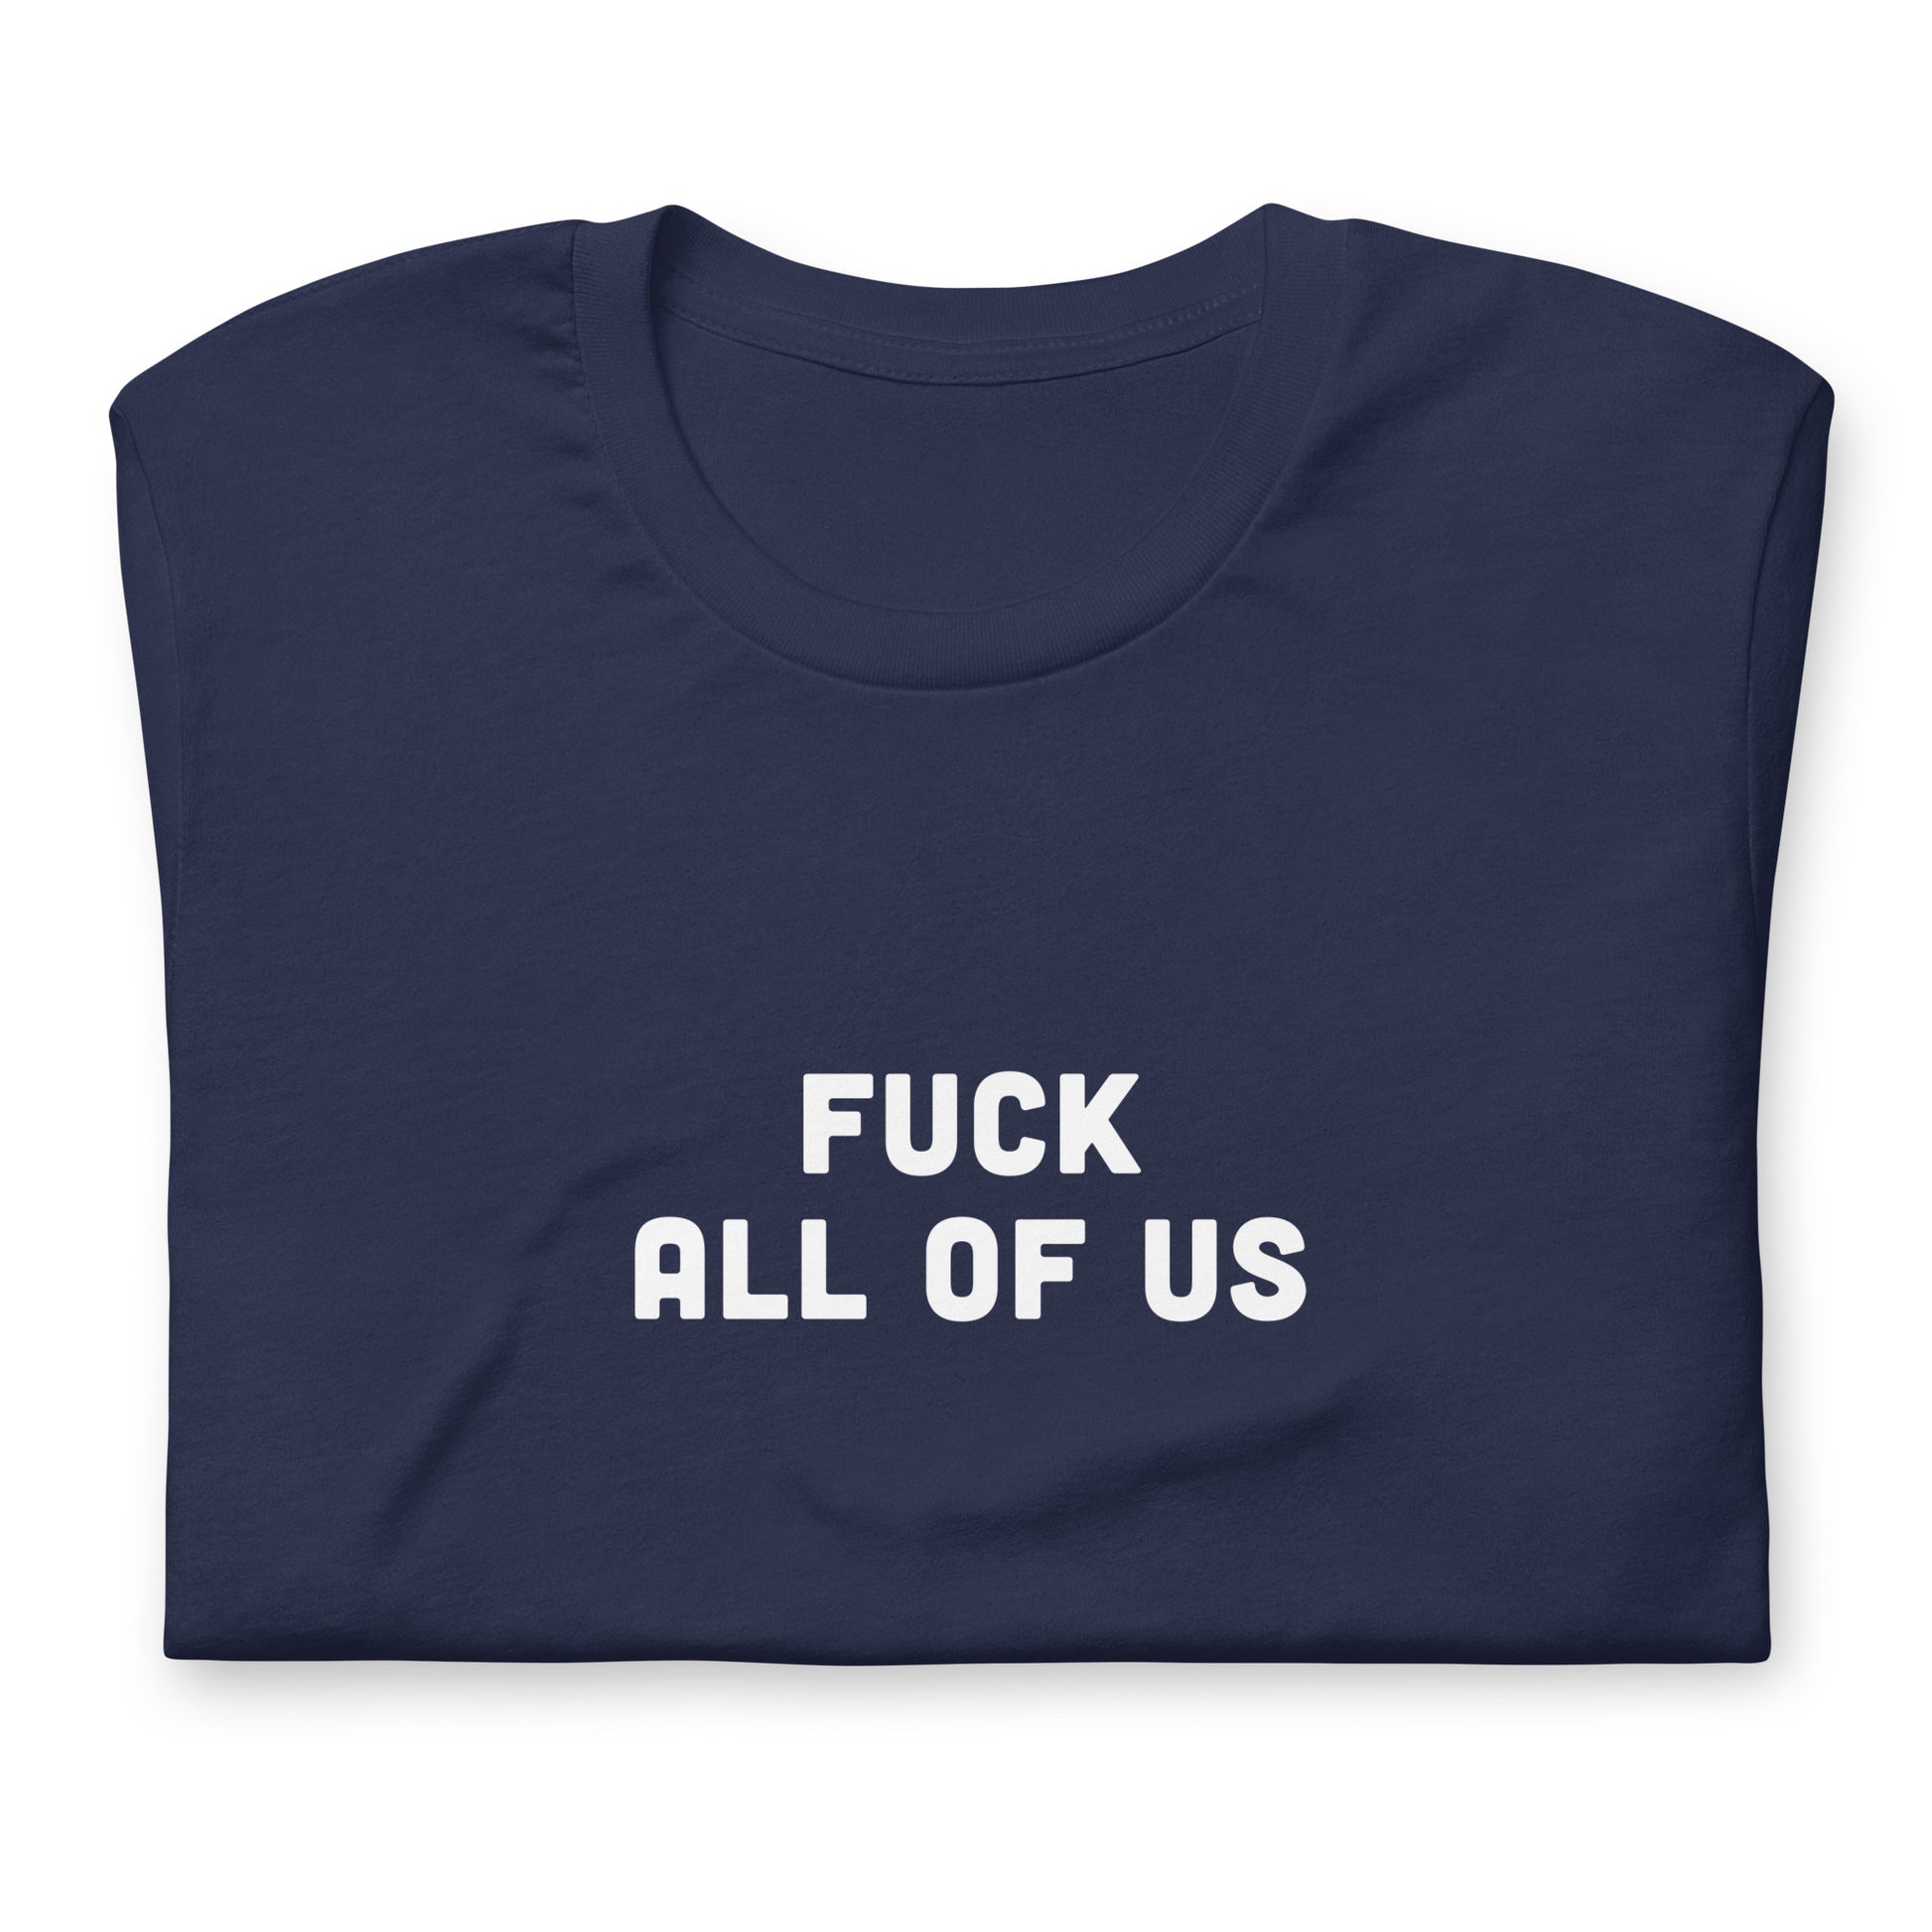 Fuck All Of Us T-Shirt Size M Color Black